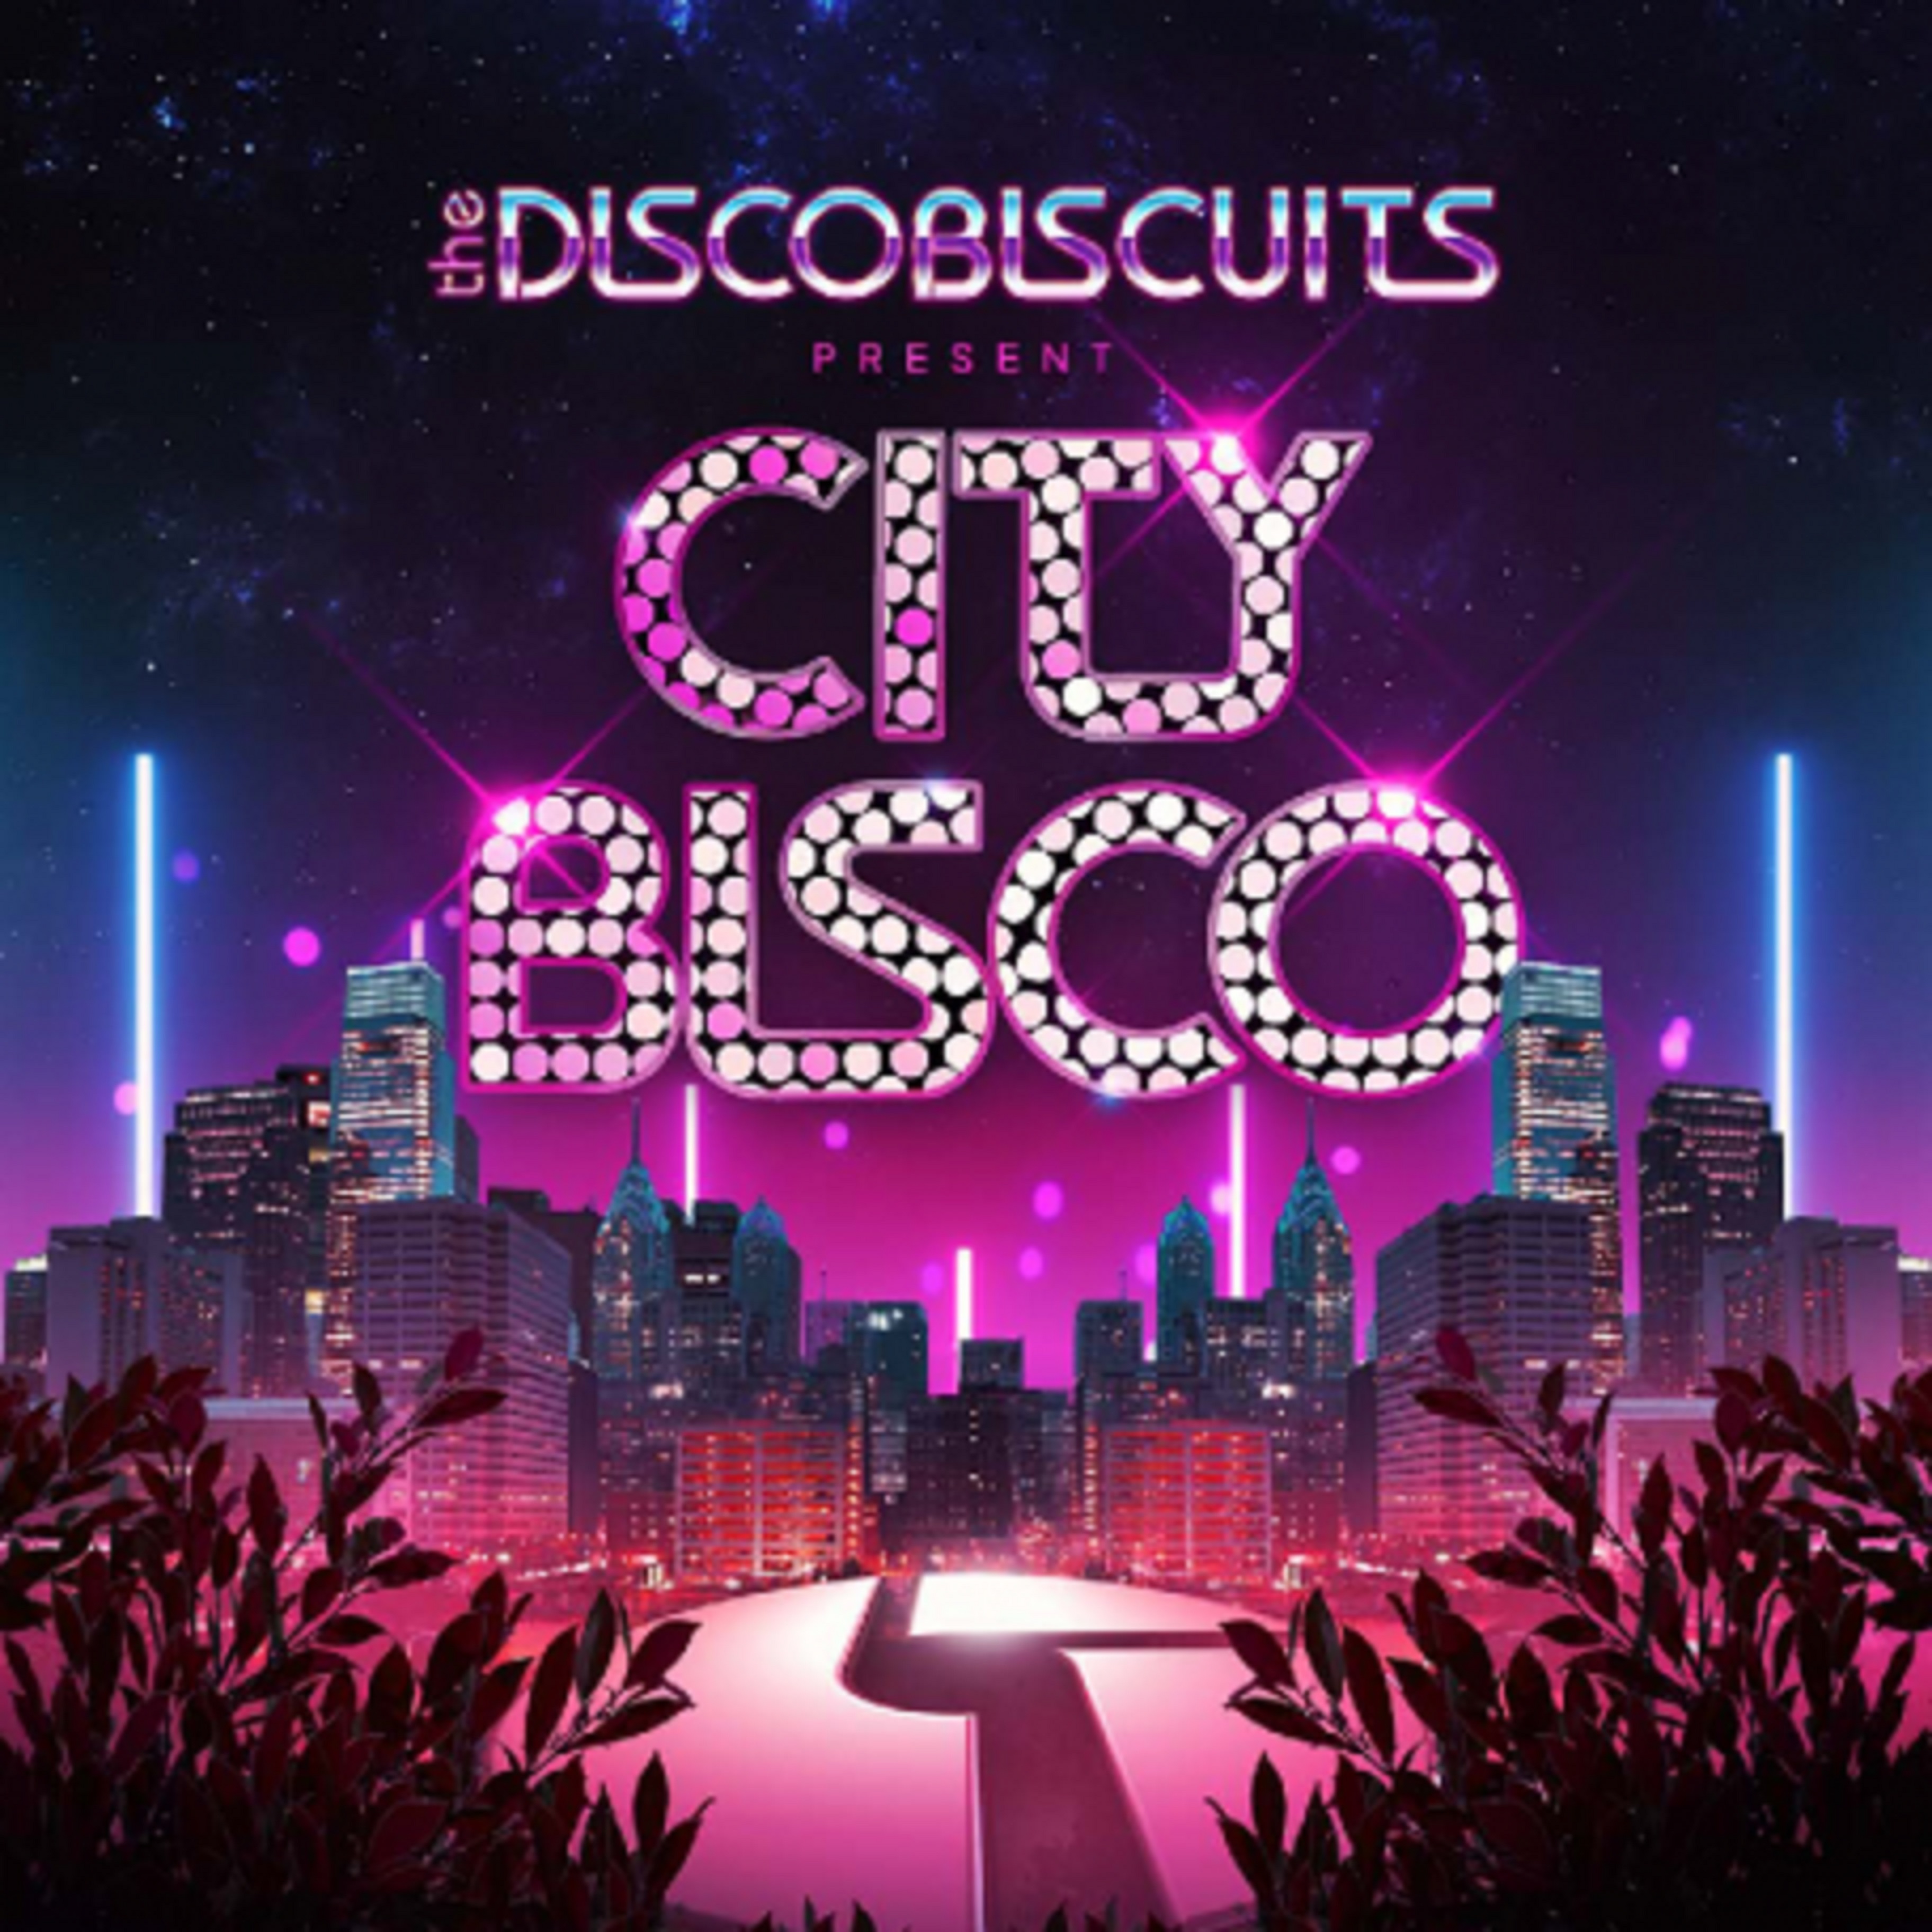 THE DISCO BISCUITS’ ANNOUNCE CITY BISCO IN PHILLY